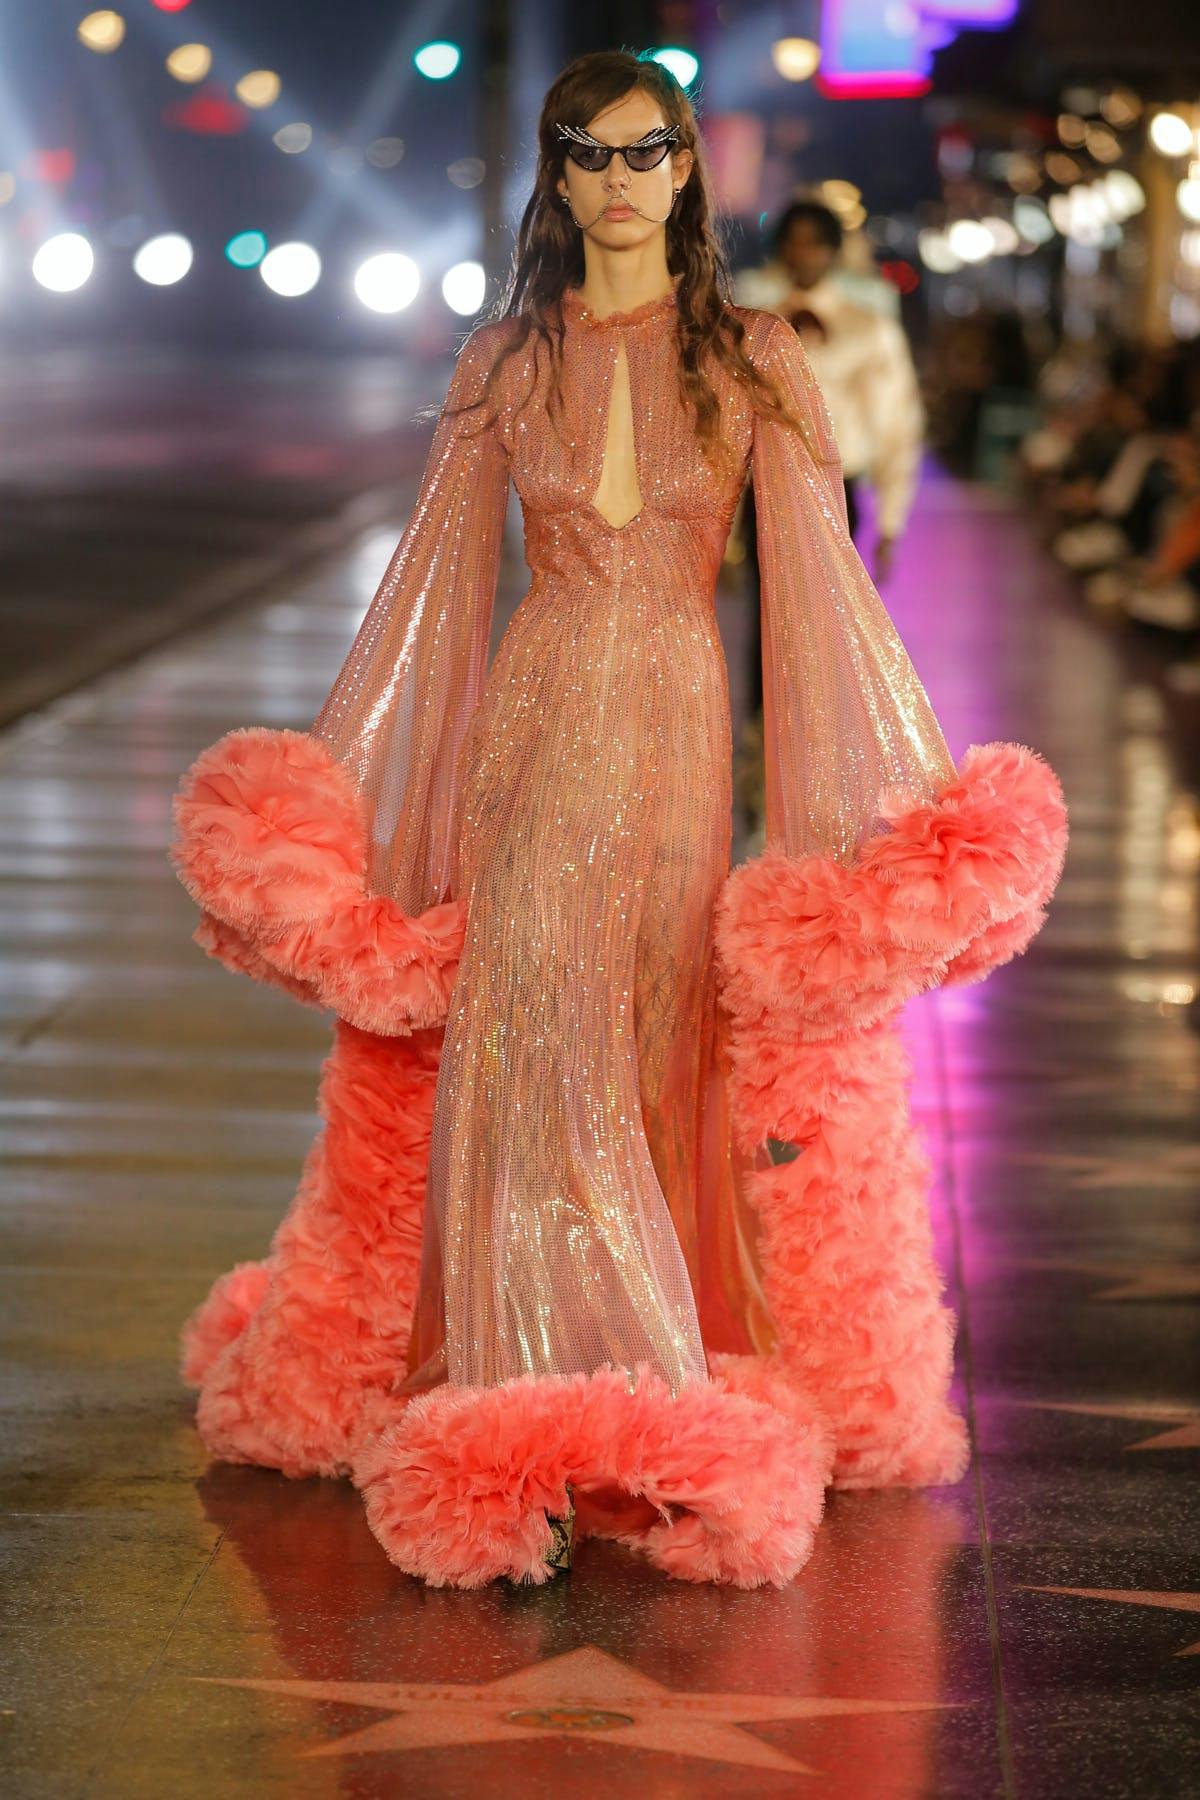 Model for Gucci in a bright coral gown